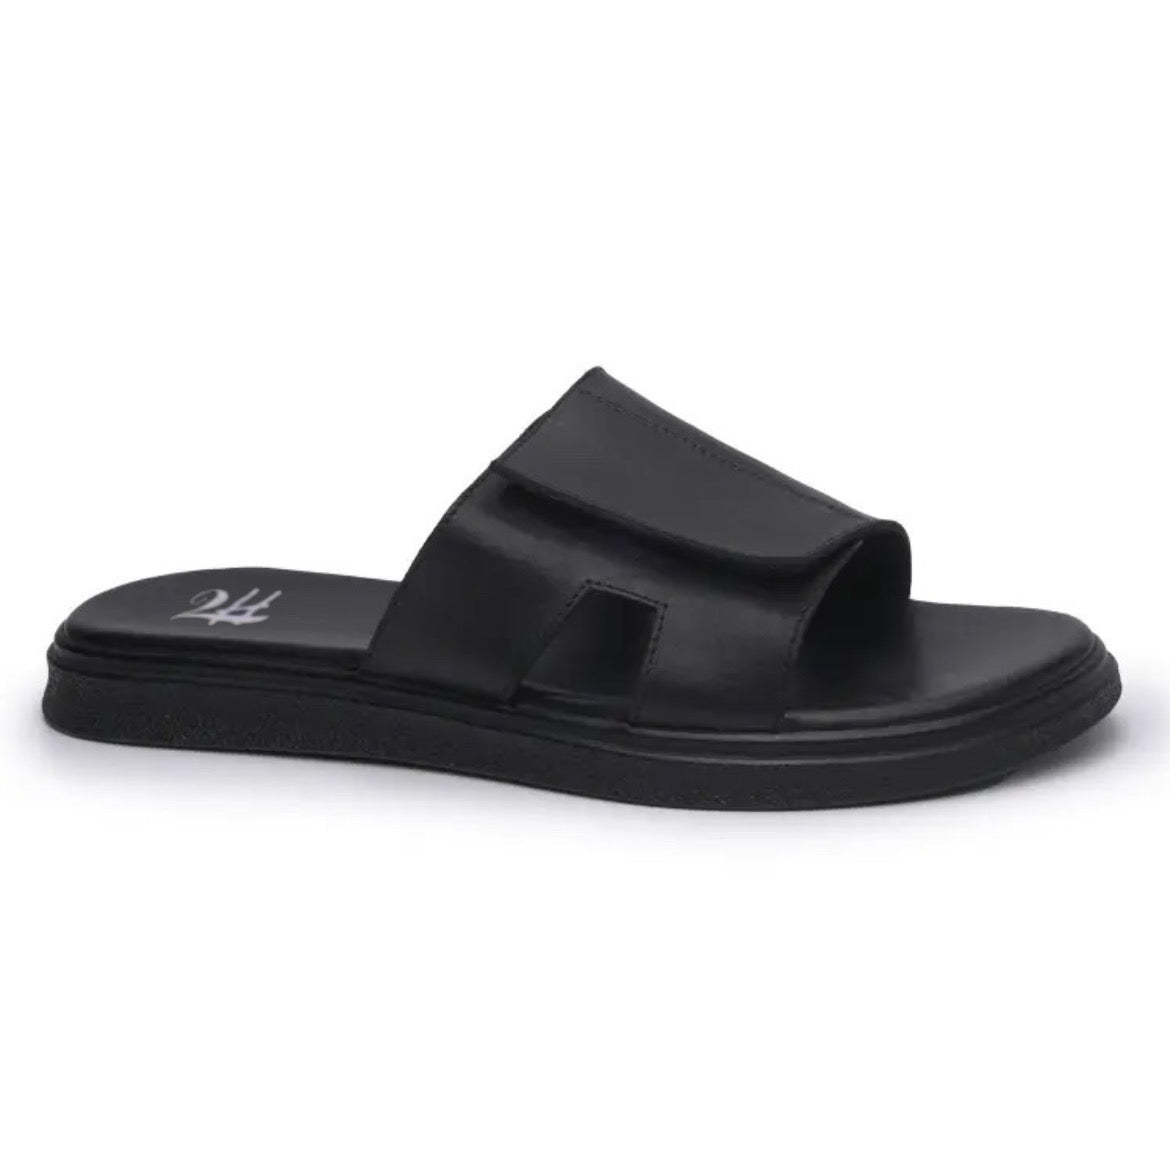 2H G02-15-1 Black Leather Slippers